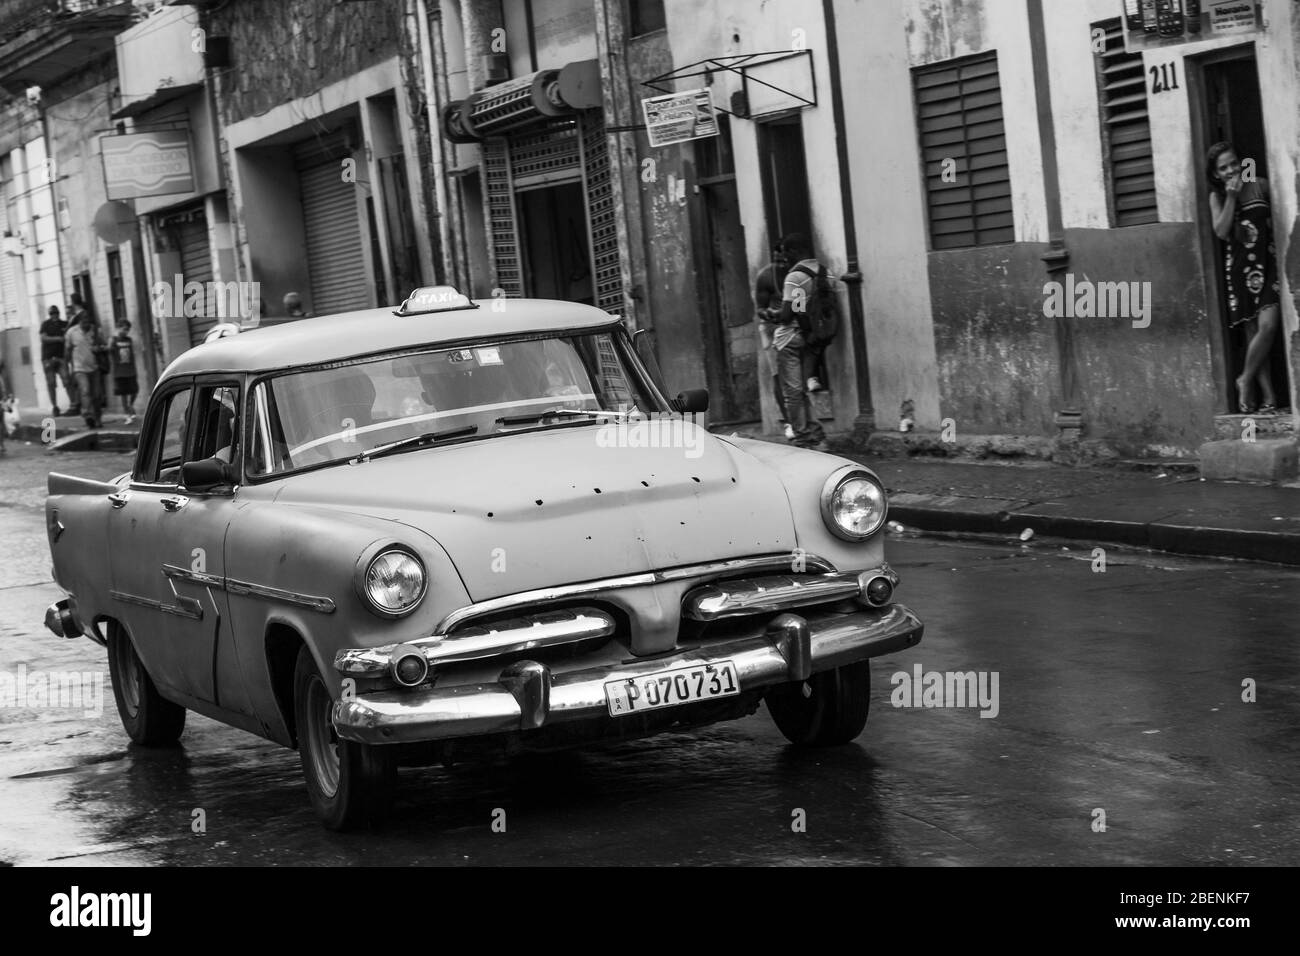 A blue car in excess of sixty years old seen in the rain in Havana (Cuba) during November 2015. Stock Photo